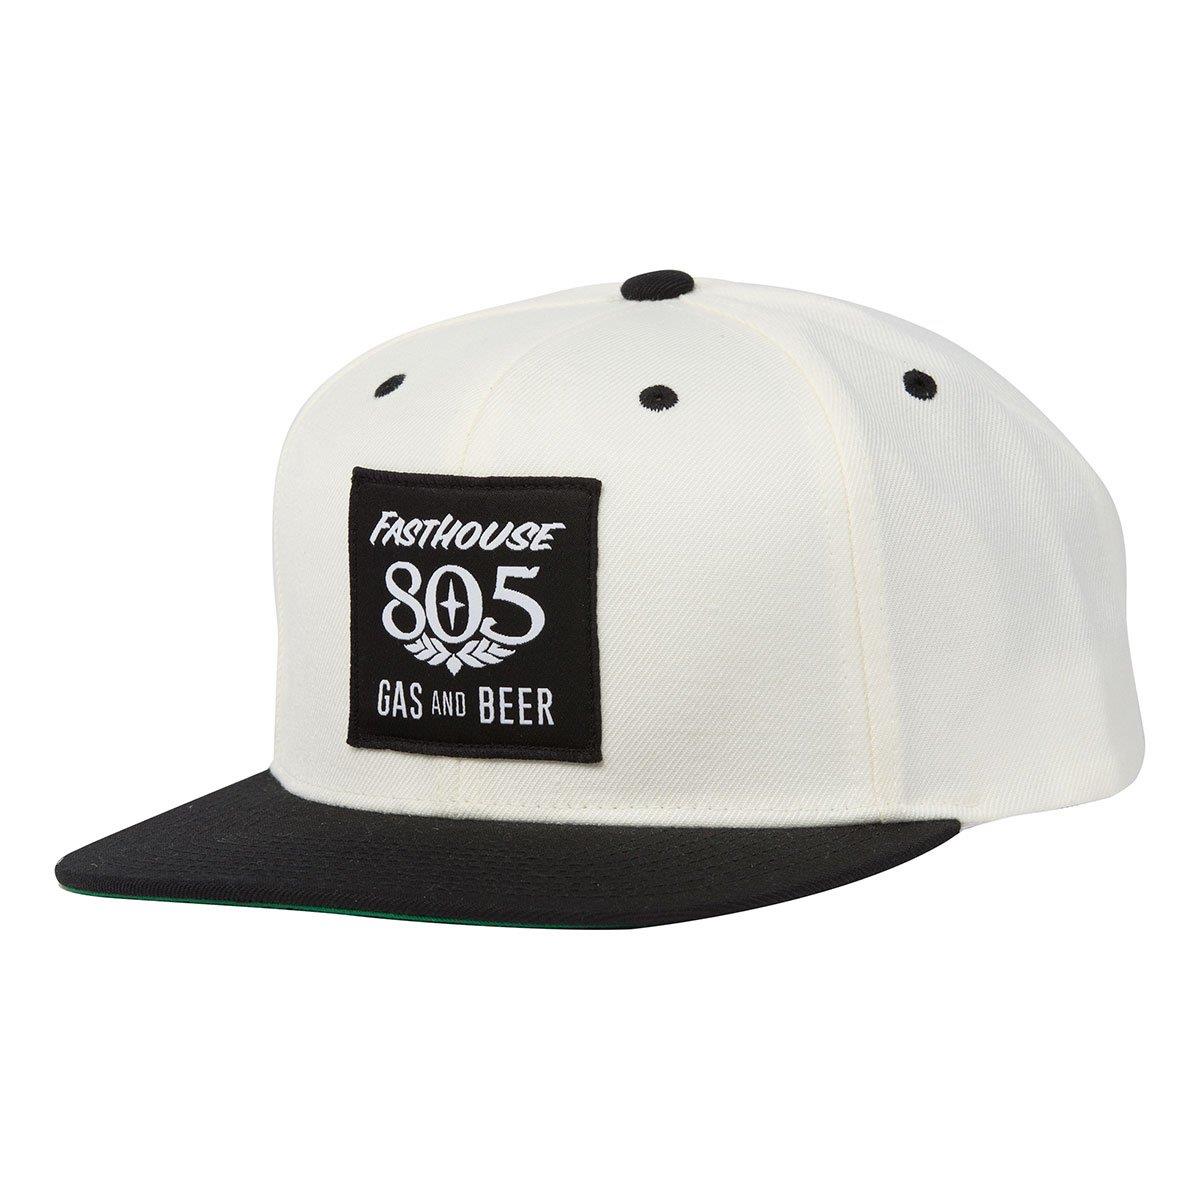 Fasthouse Cappellino Snap Back 805 White